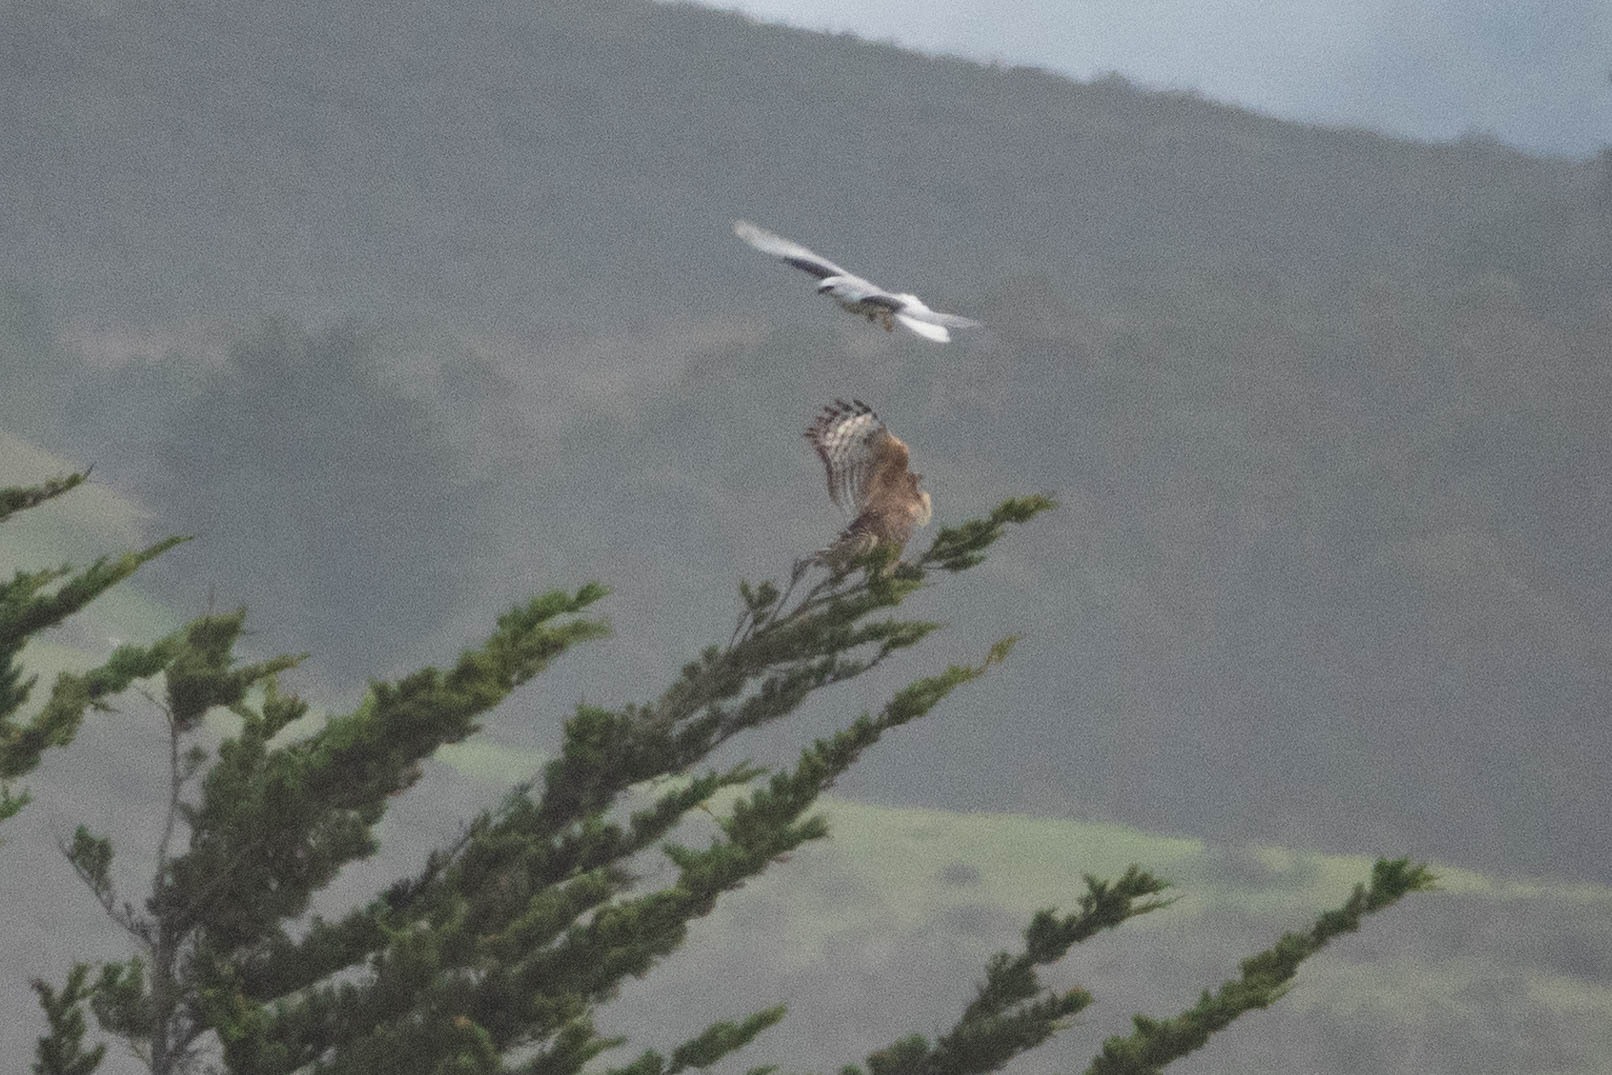 The White-tailed Kite harassing the Red-shouldered Hawk.